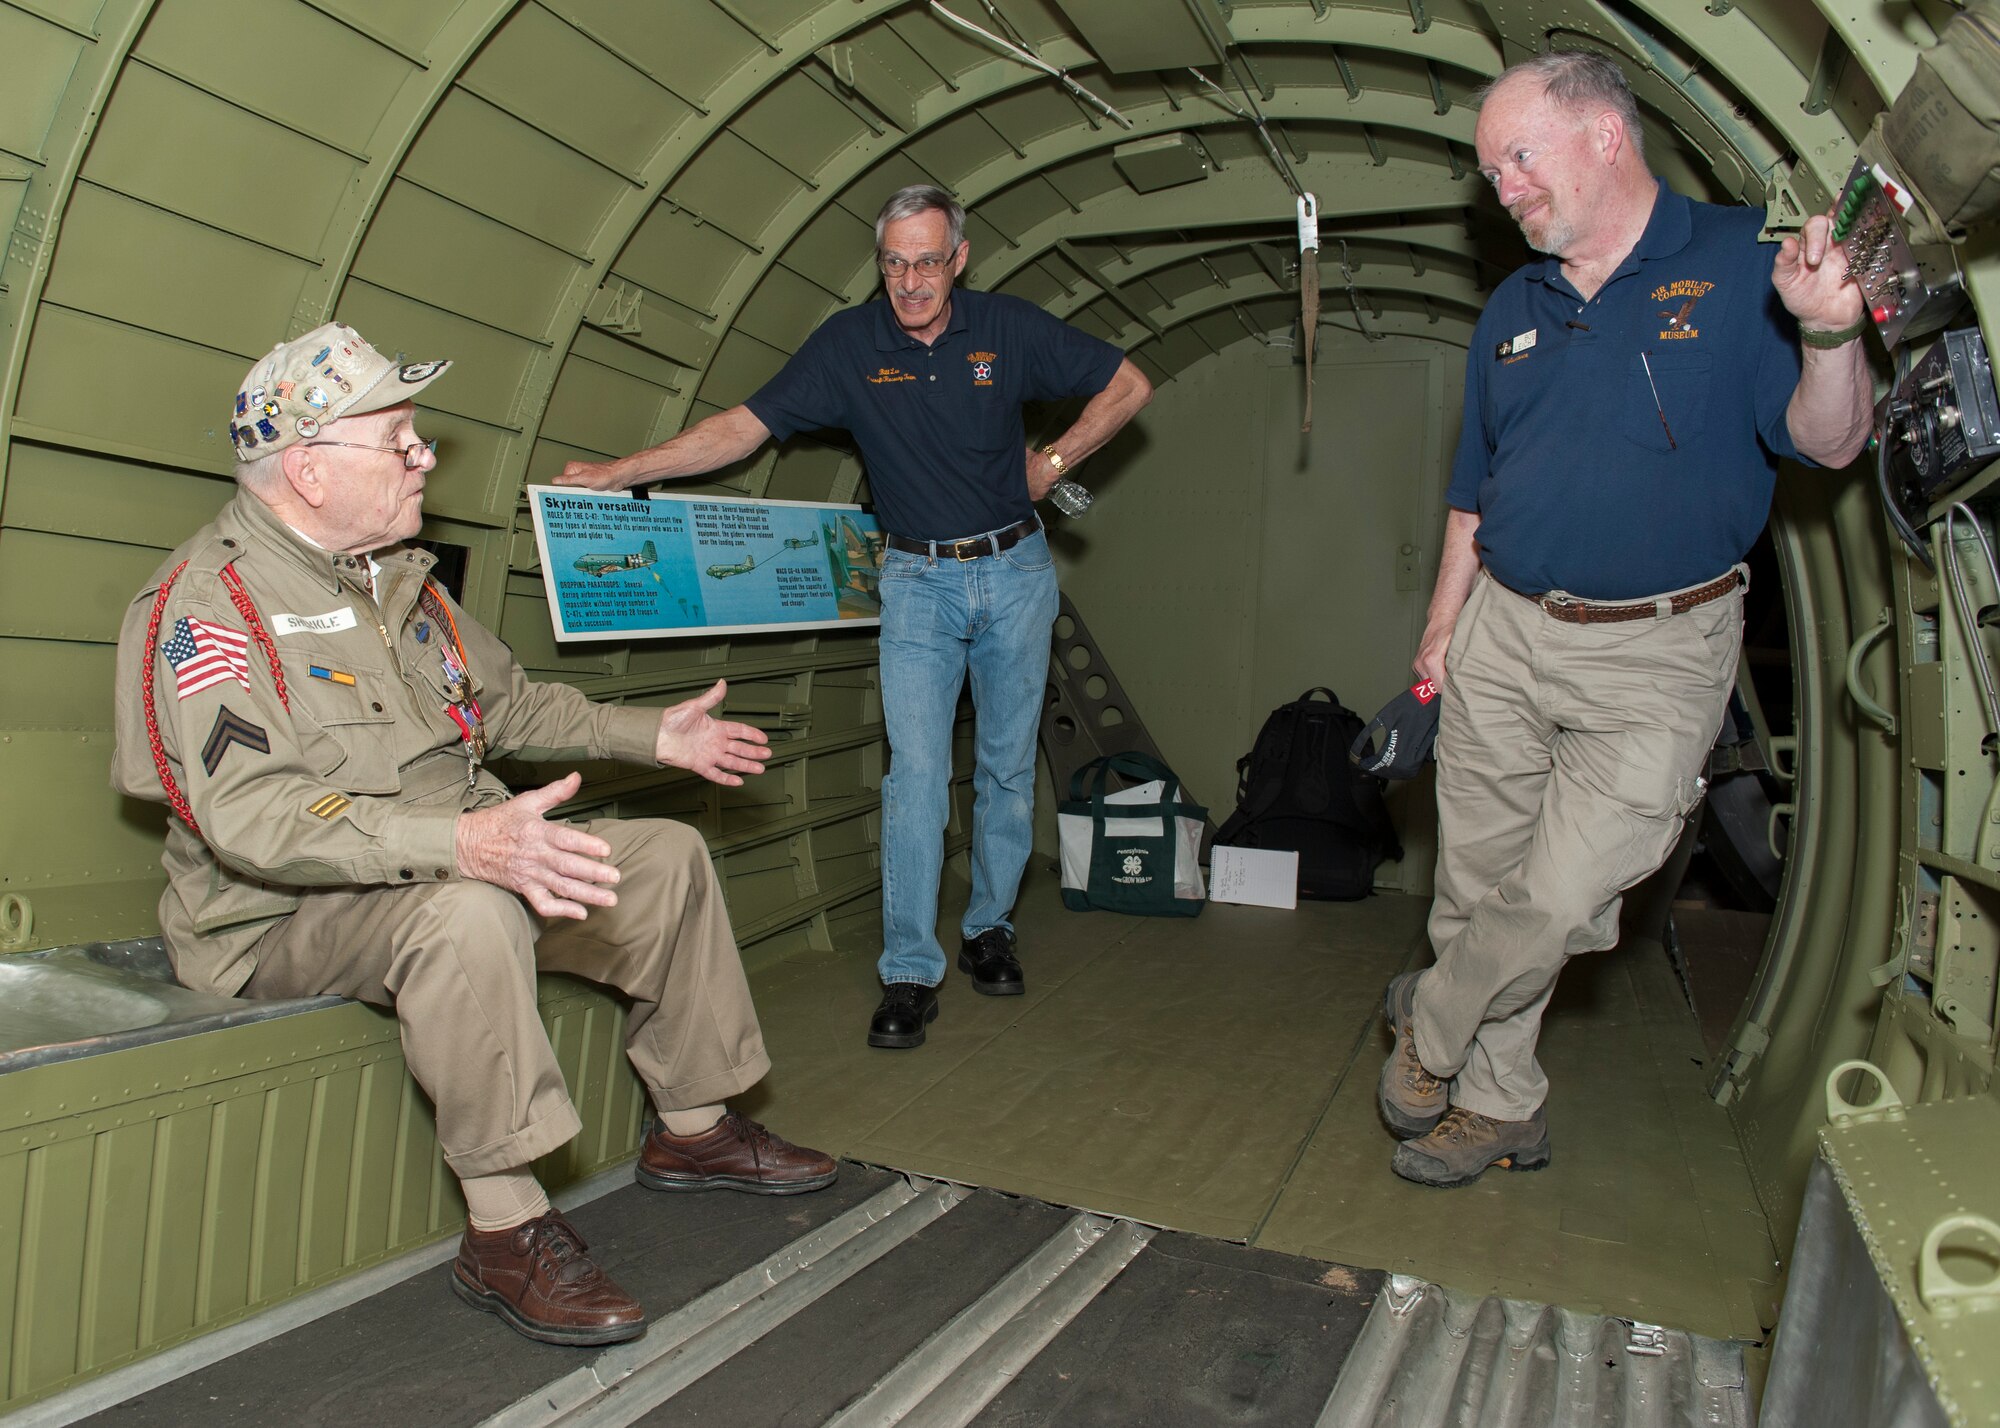 George Shenkle, left, talks to Bill Lee, Air Mobility Command Museum volunteer, center, and Bob Leicht, AMC Museum volunteer, inside a C-47A Skytrain April 18, 2015, at the AMC Museum on Dover Air Force Base, Del. Lee and Leicht are part of a restoration team that recently restored the interior of the aircraft to an accurate World War II-era presentation. (U.S. Air Force photo/Airman 1st Class Zachary Cacicia)